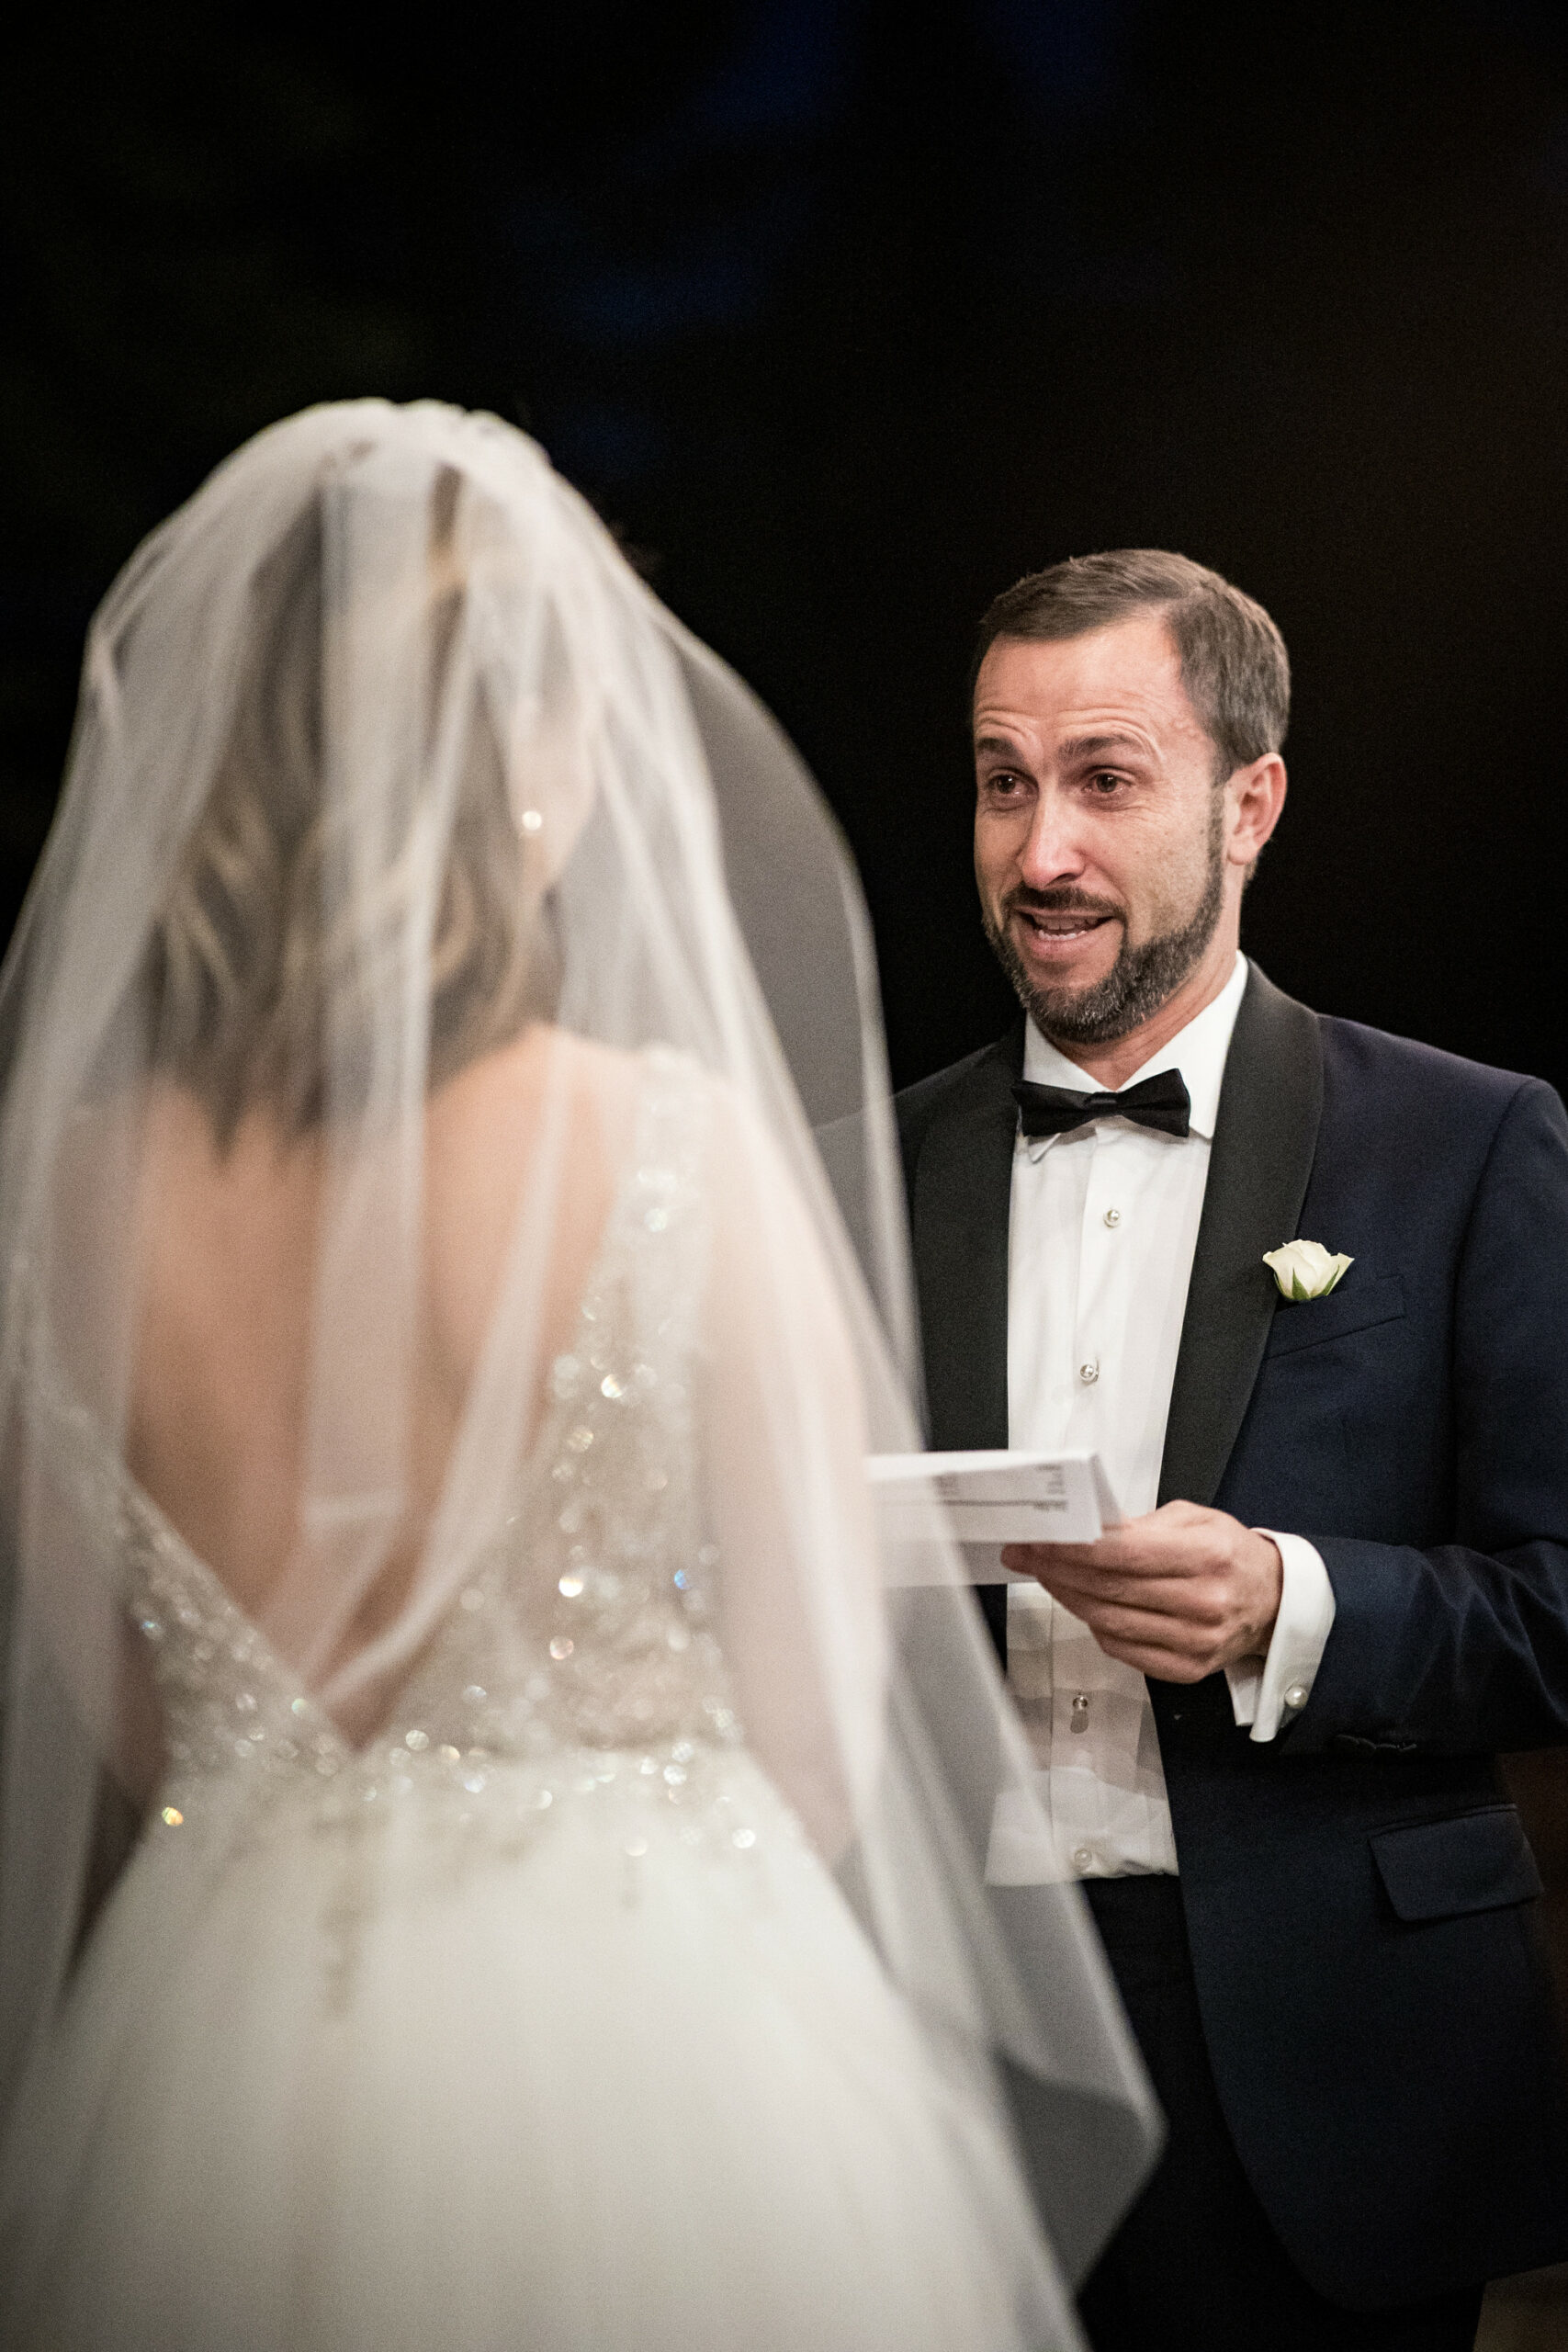 Groom reading his vows at a night wedding.